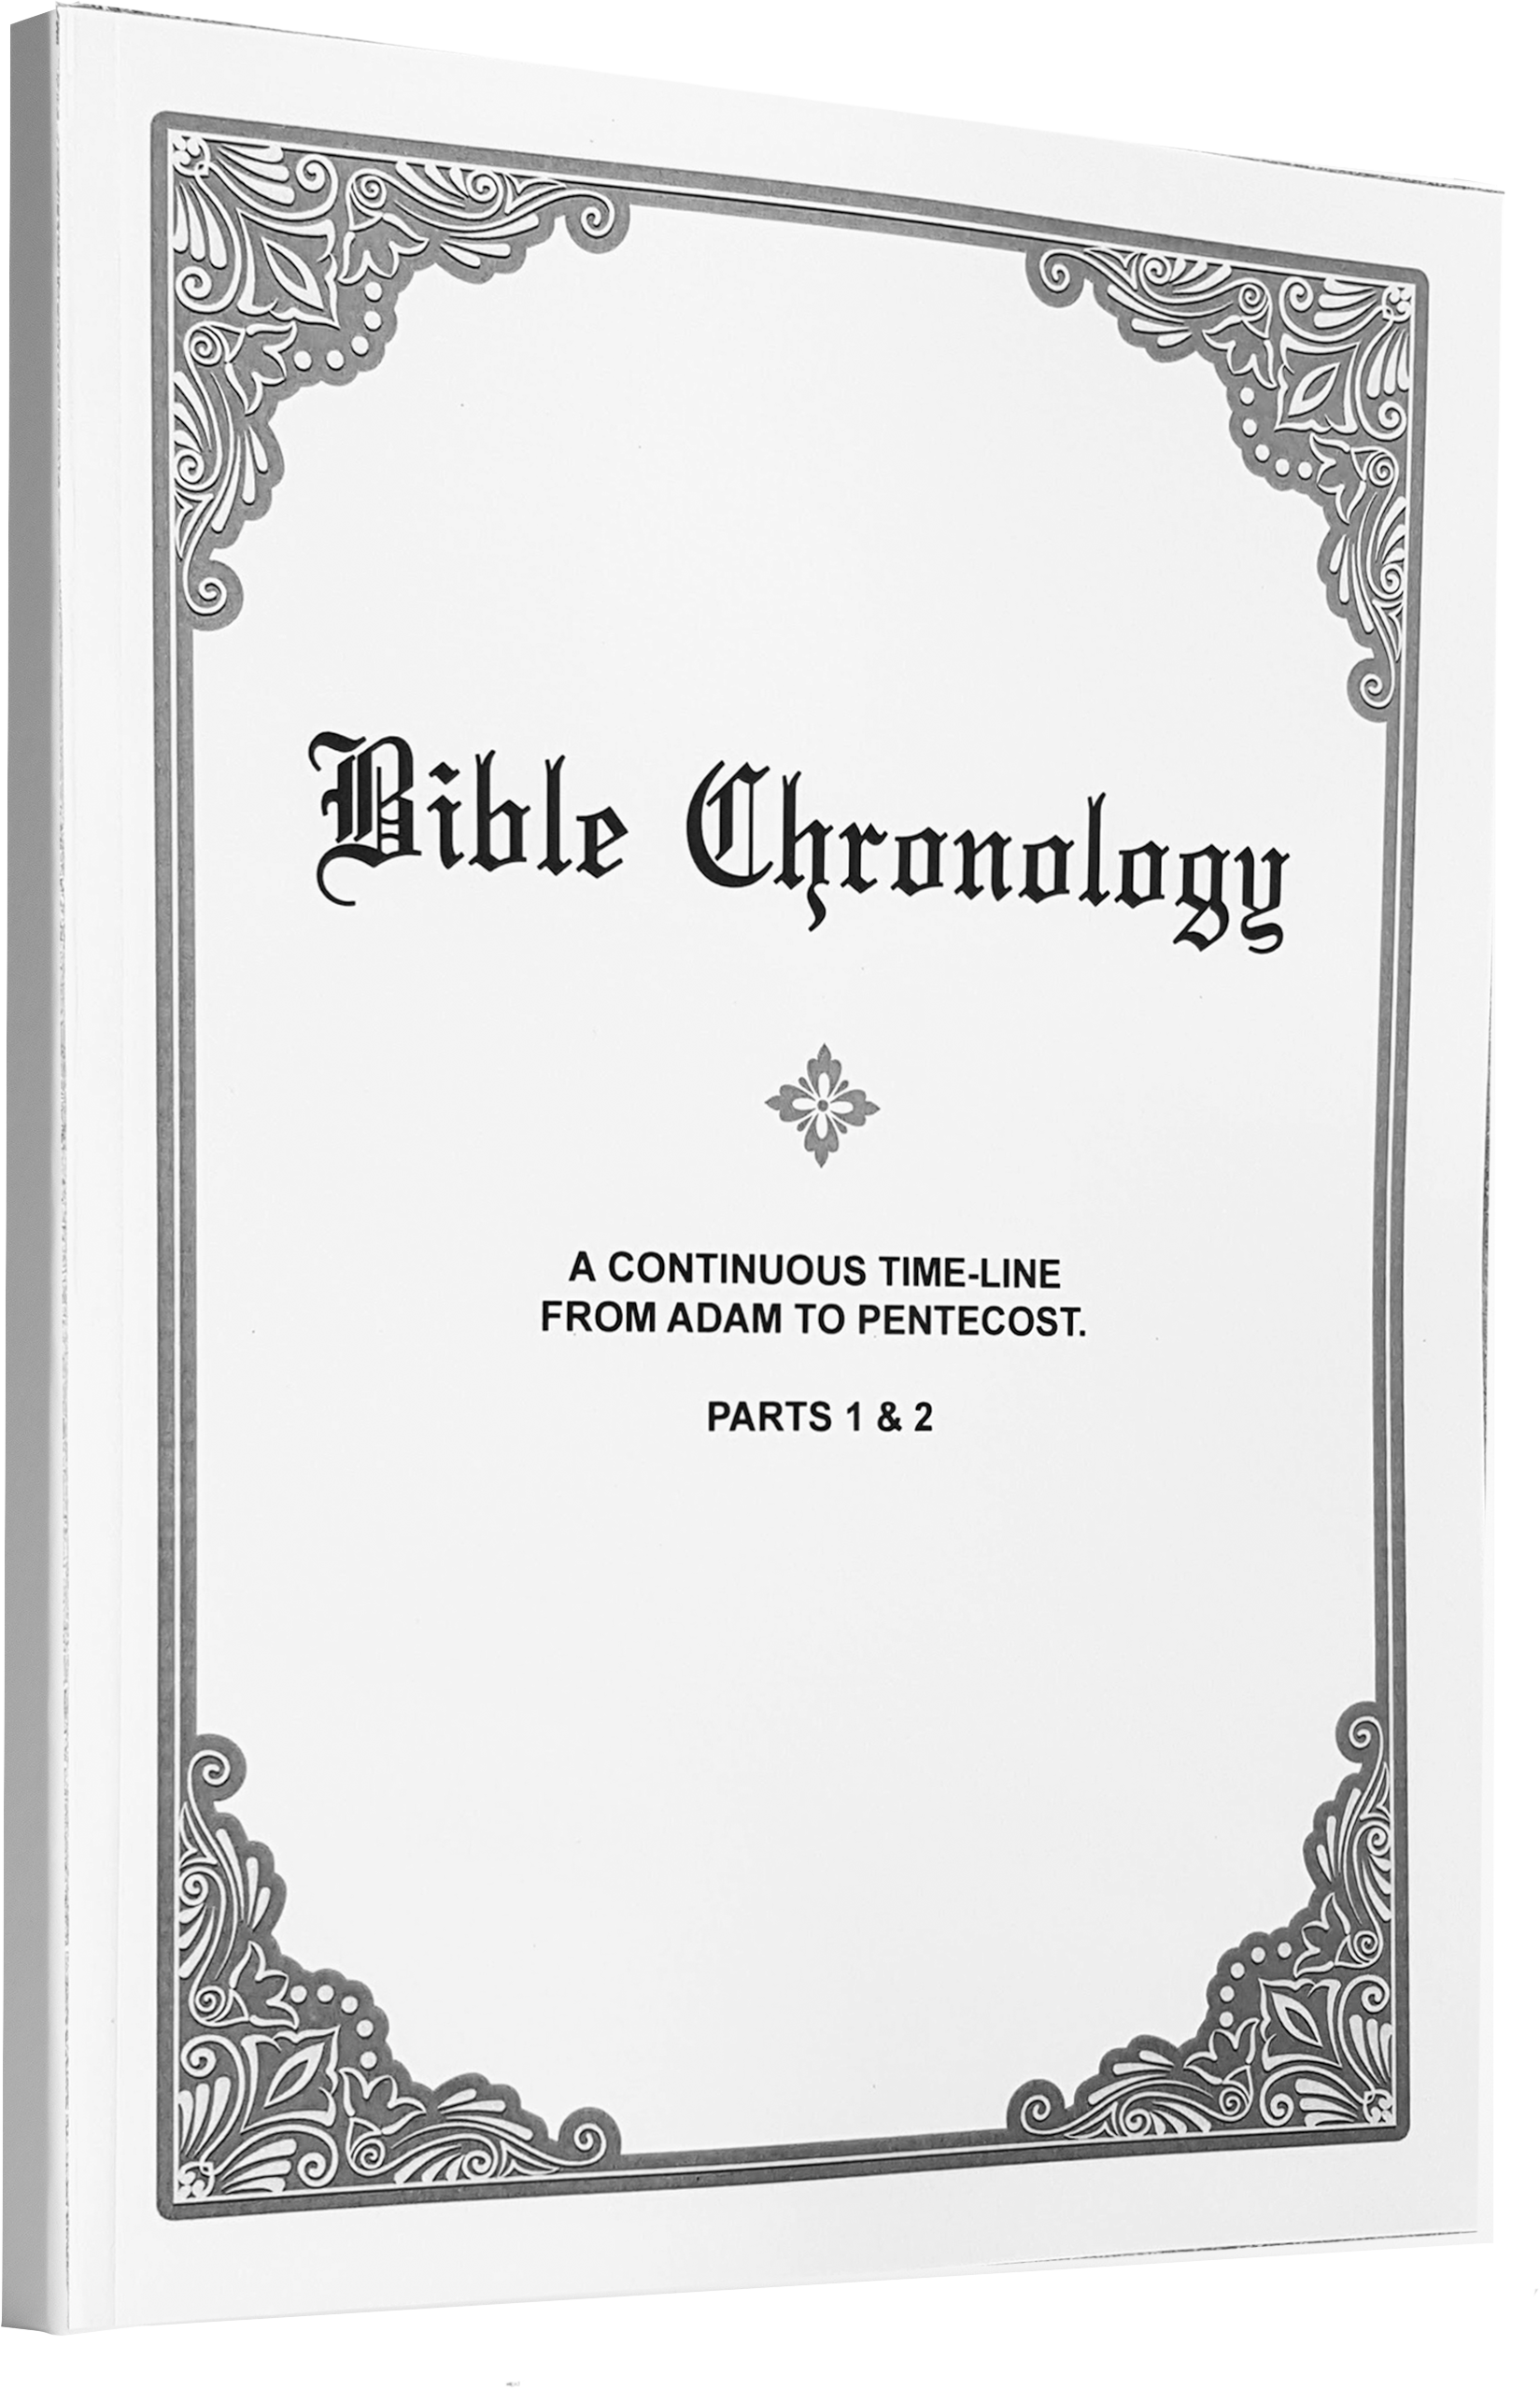 bible-chronology-from-adam-to-pentecost-the-bible-chronology-book